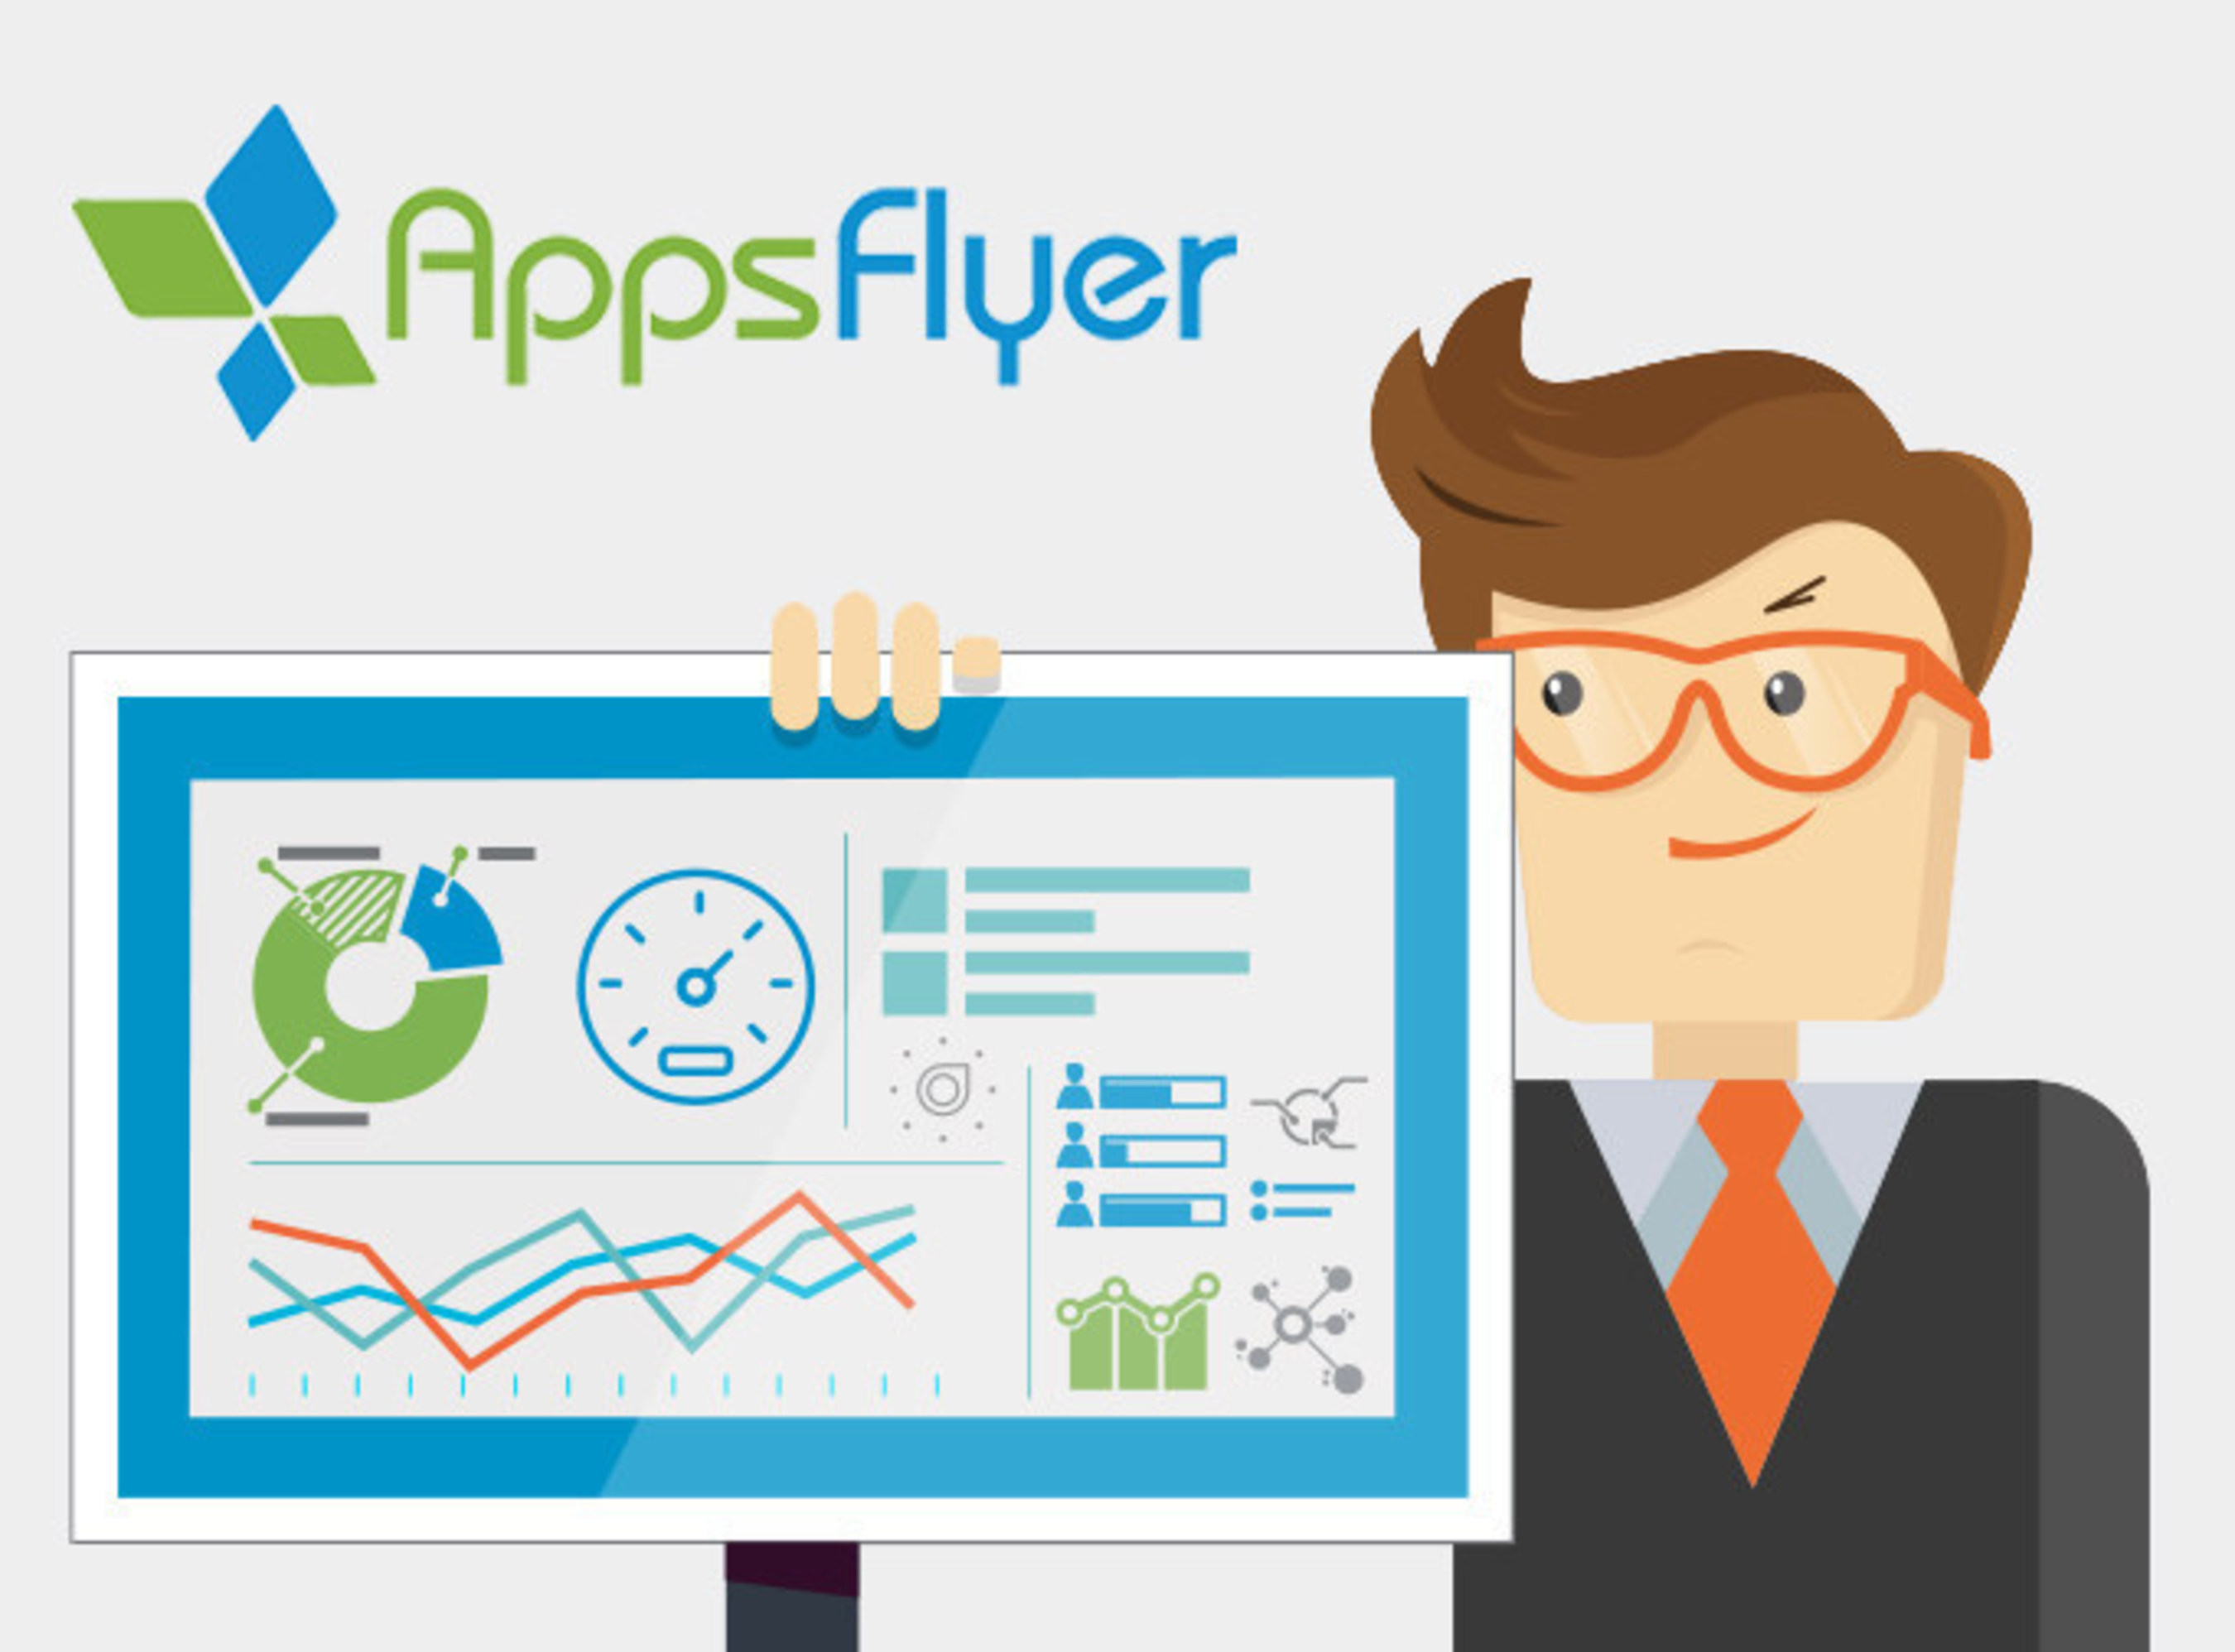 AppsFlyer's NativeTrack(TM) technology provides app marketers, brands and agencies with unbiased, independent measurement of mobile ad campaigns.